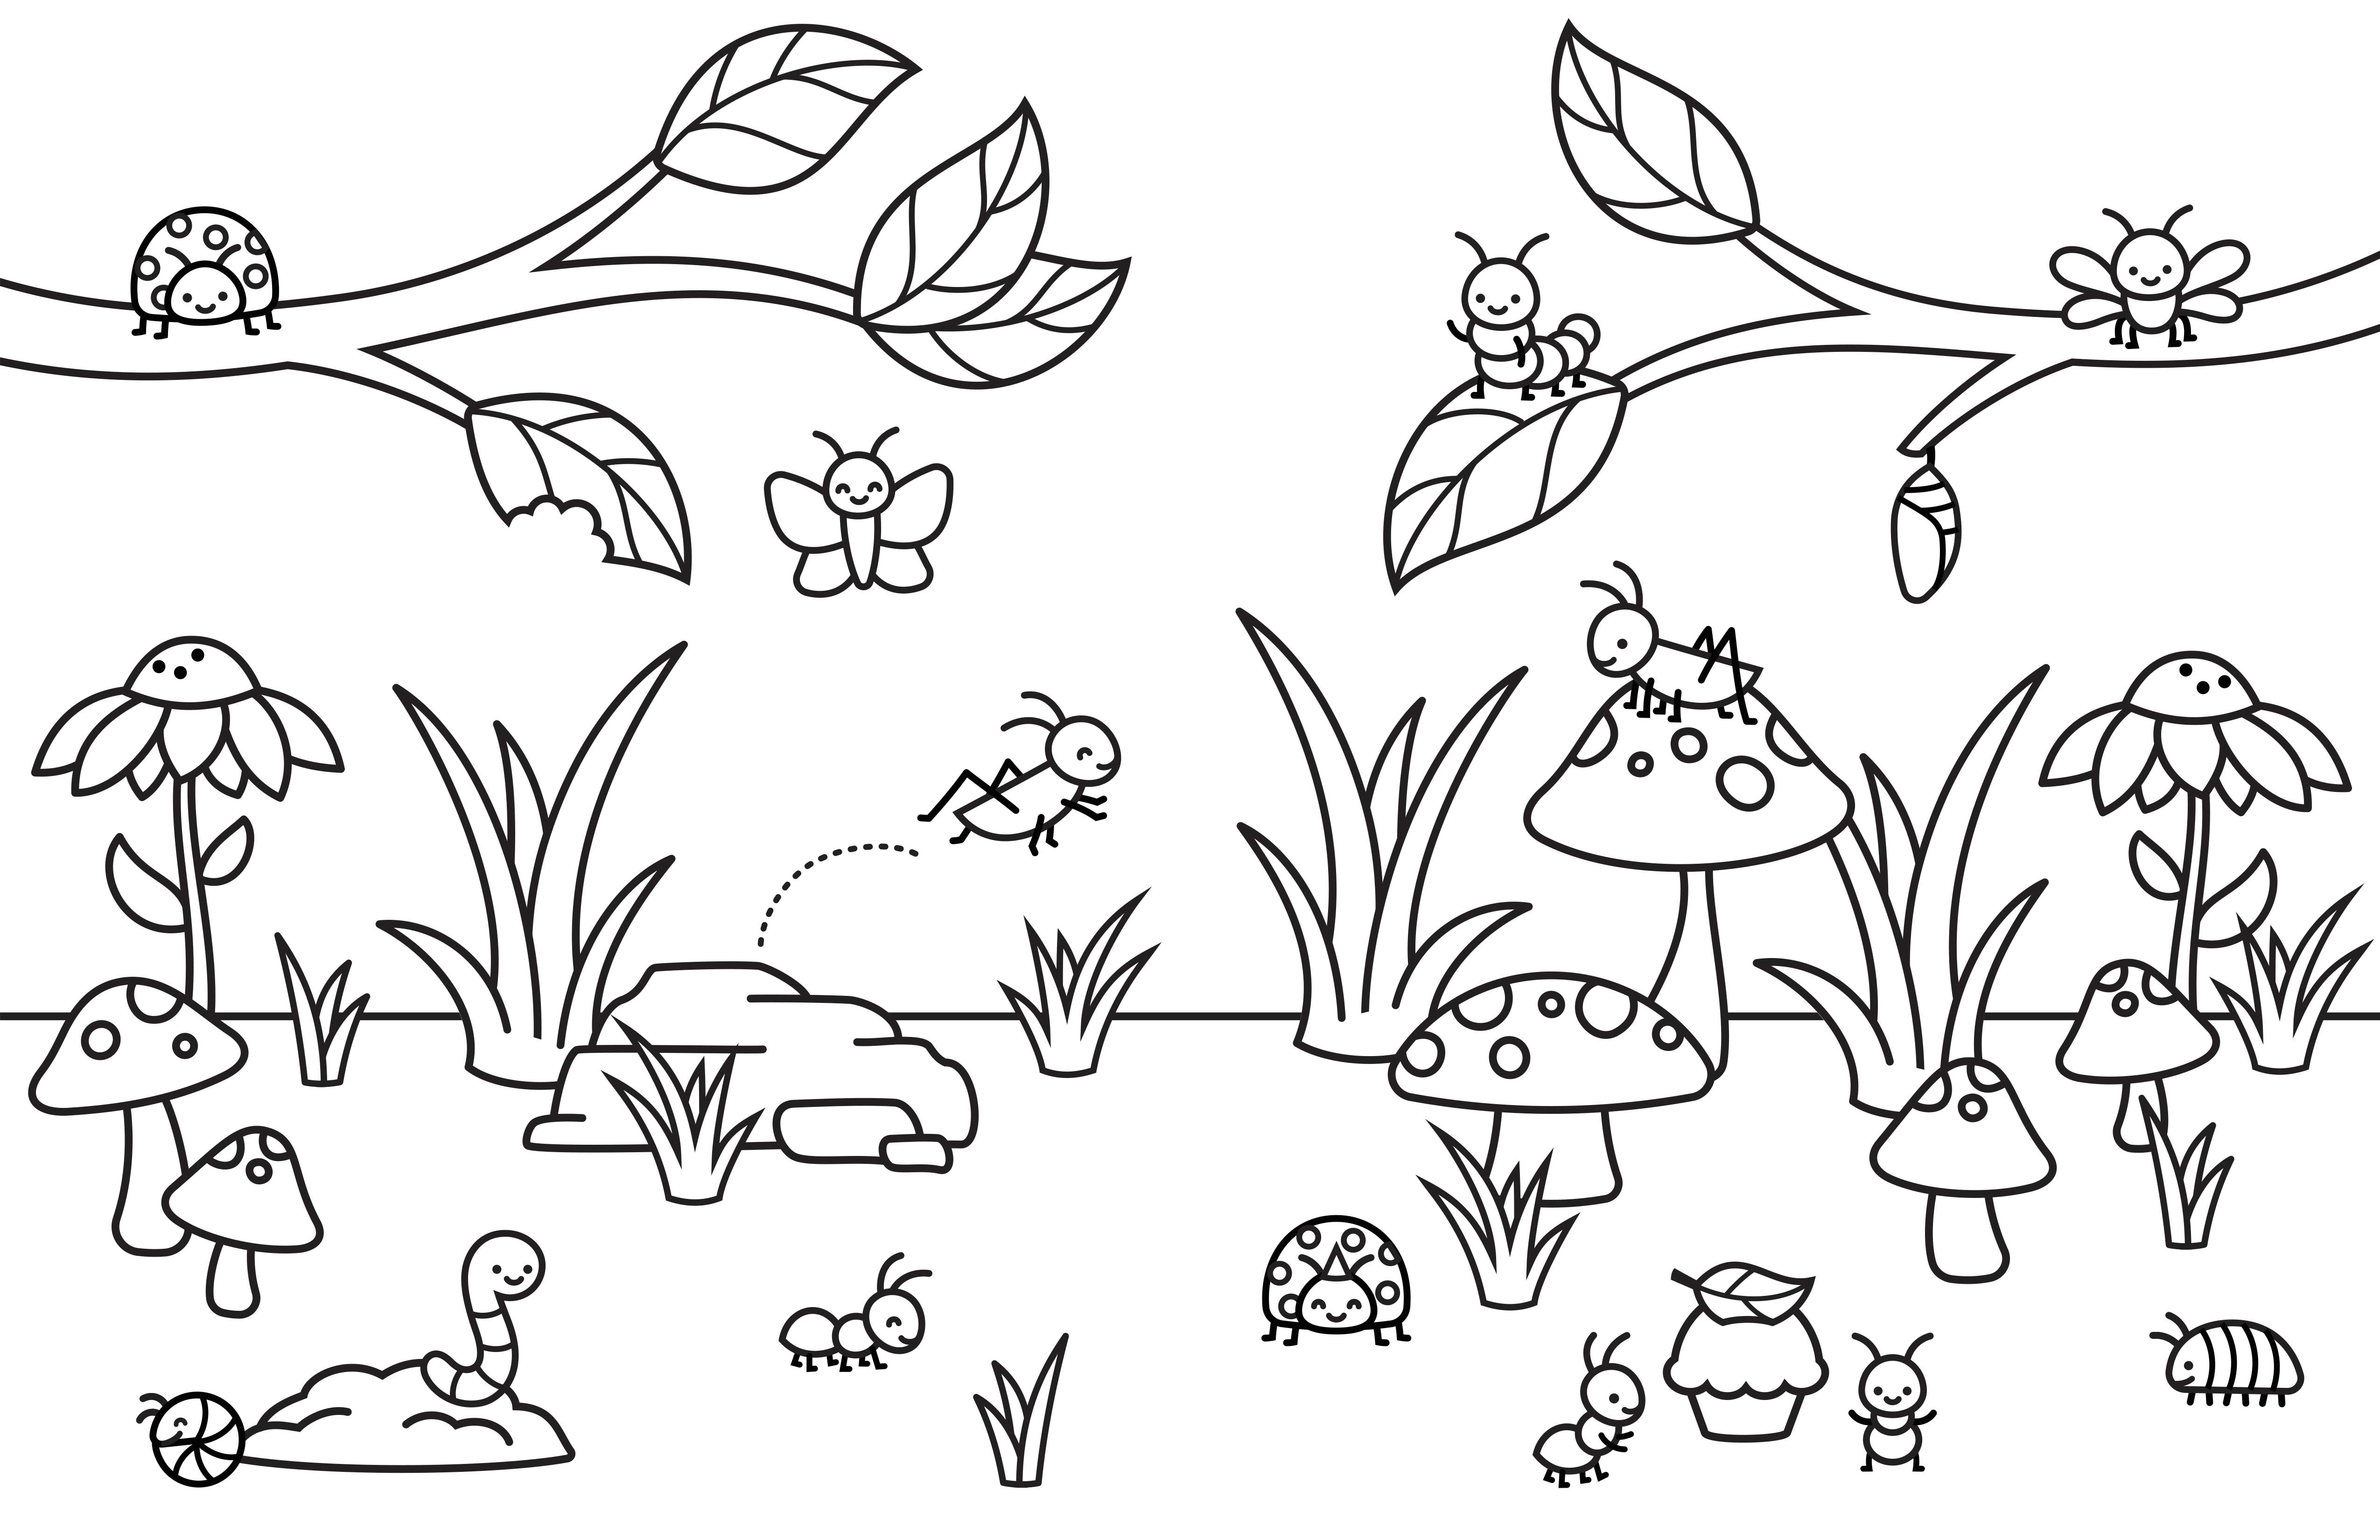 Spring coloring book lawn fawn